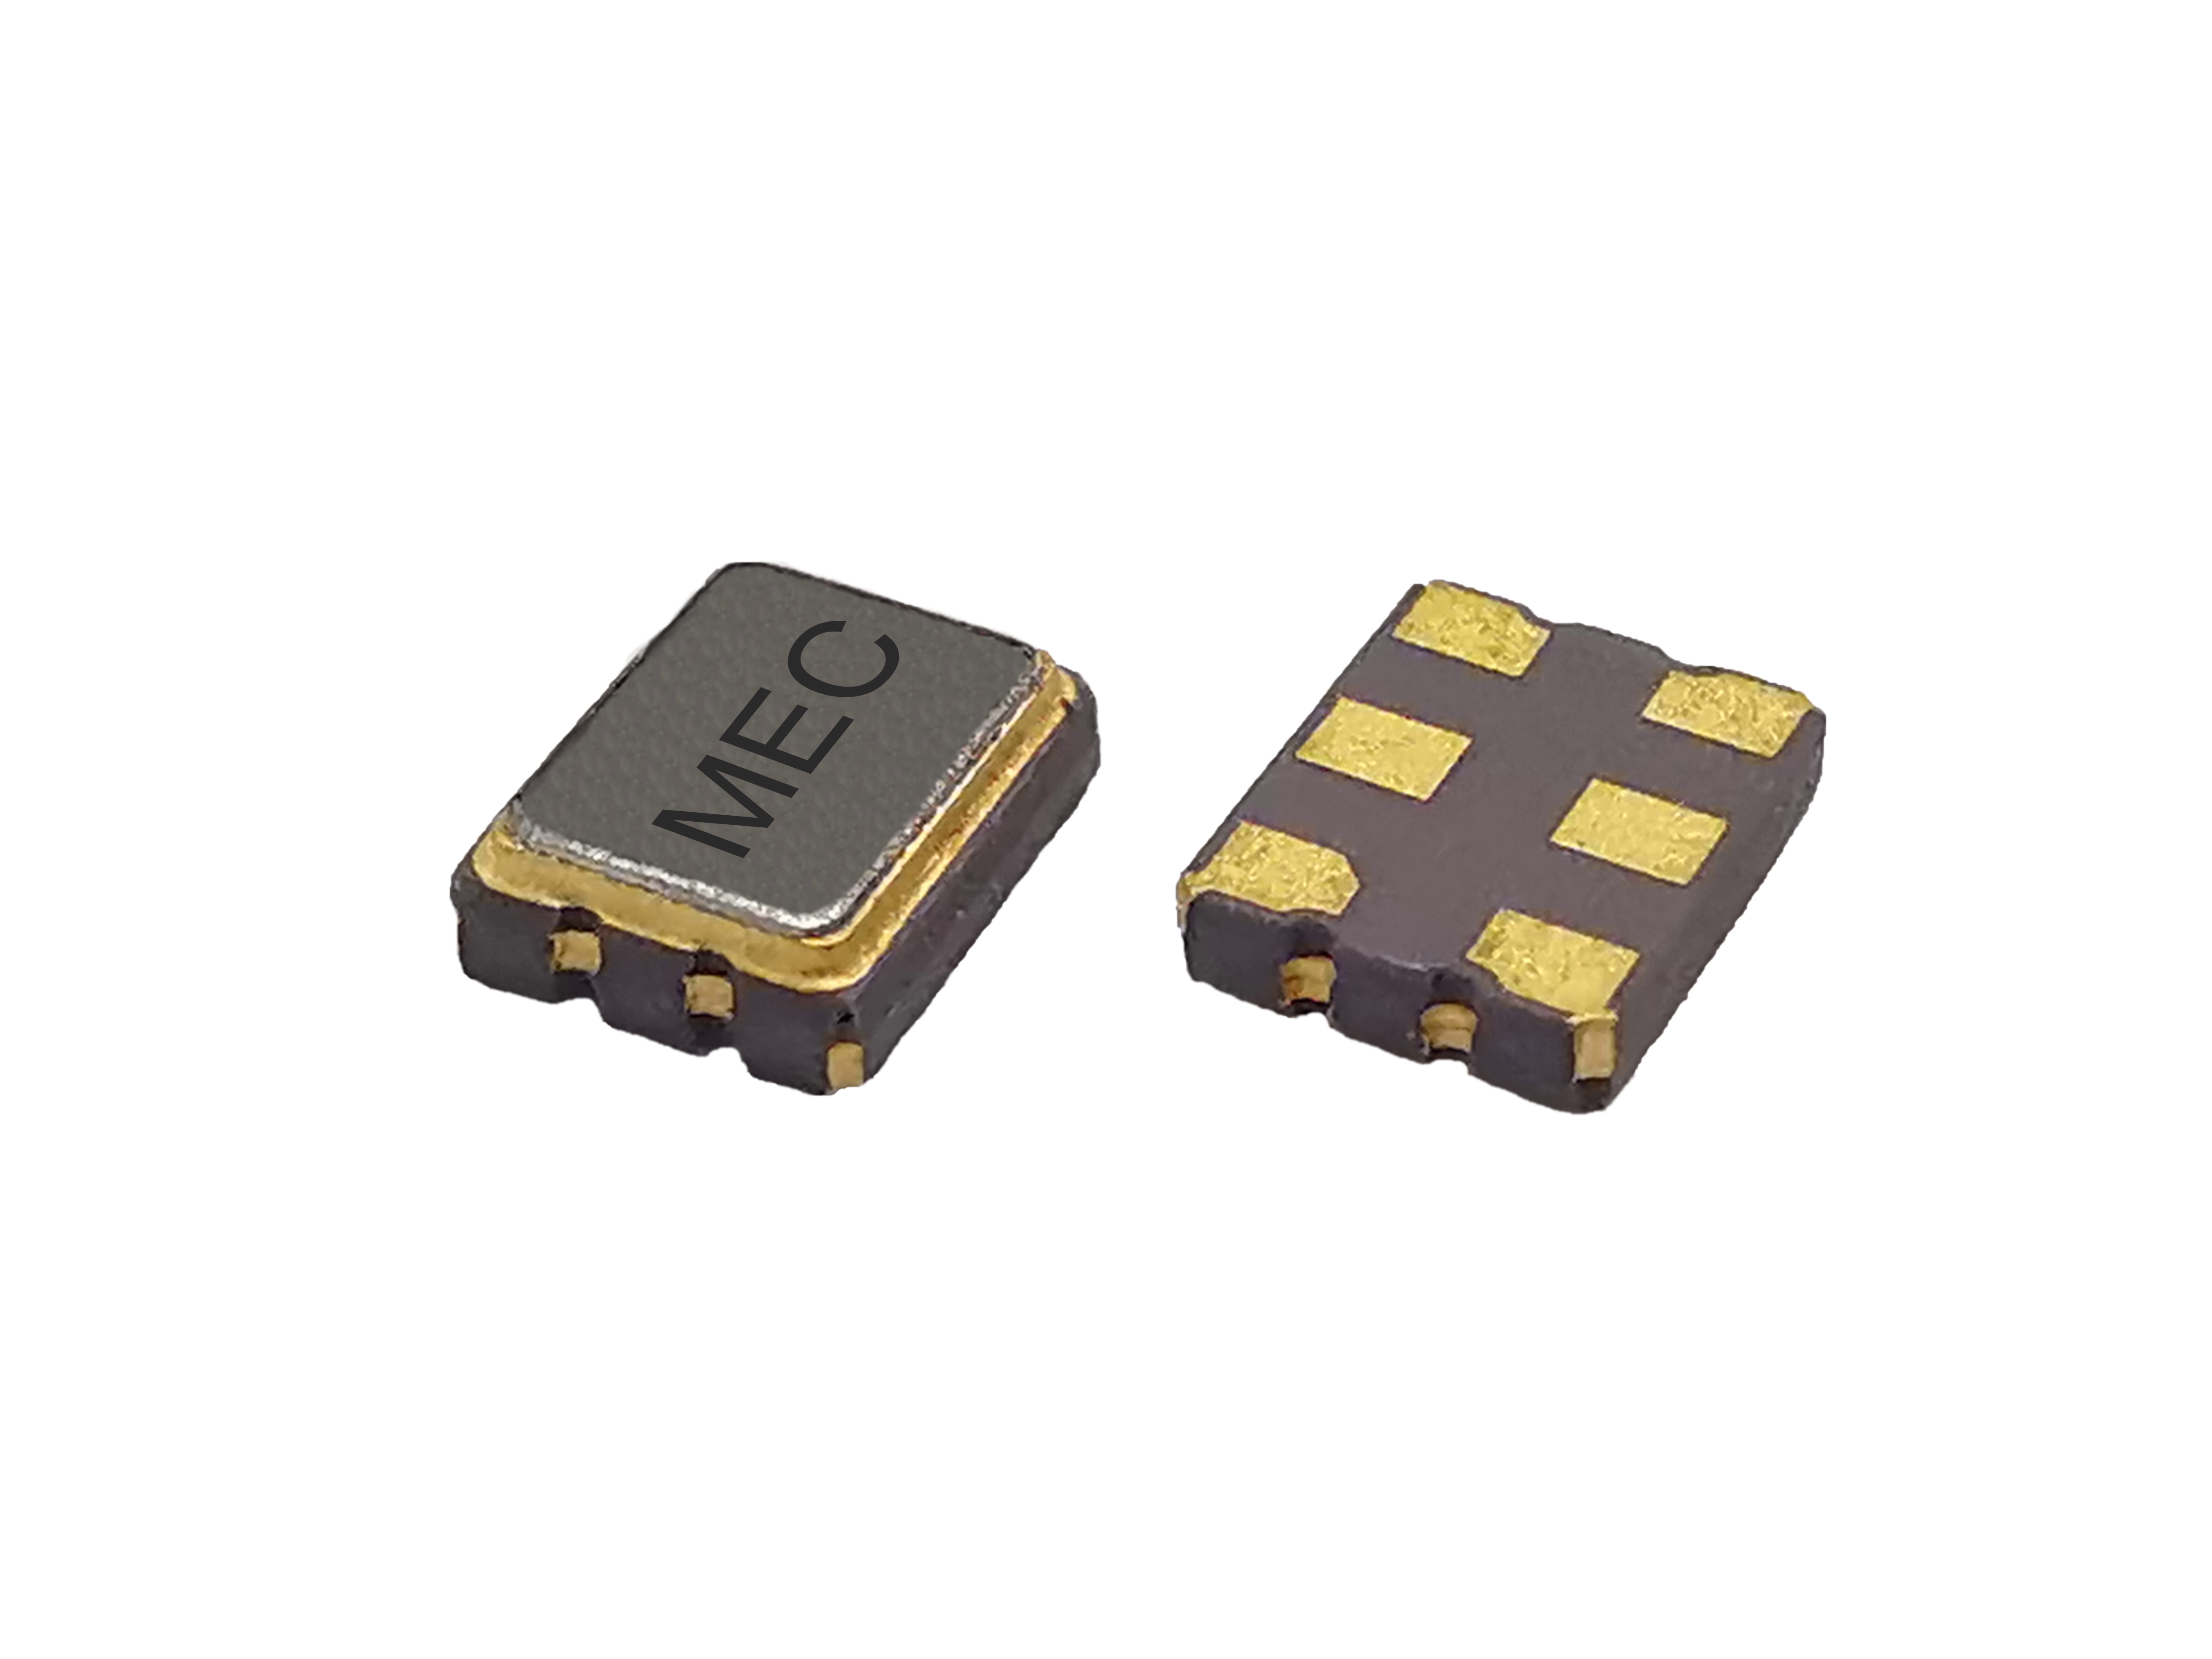 HCDQF326 3225 3.3V Quick-Turn Programmable Frequency Swithable Differential LVDS SMD Crystal Oscillator